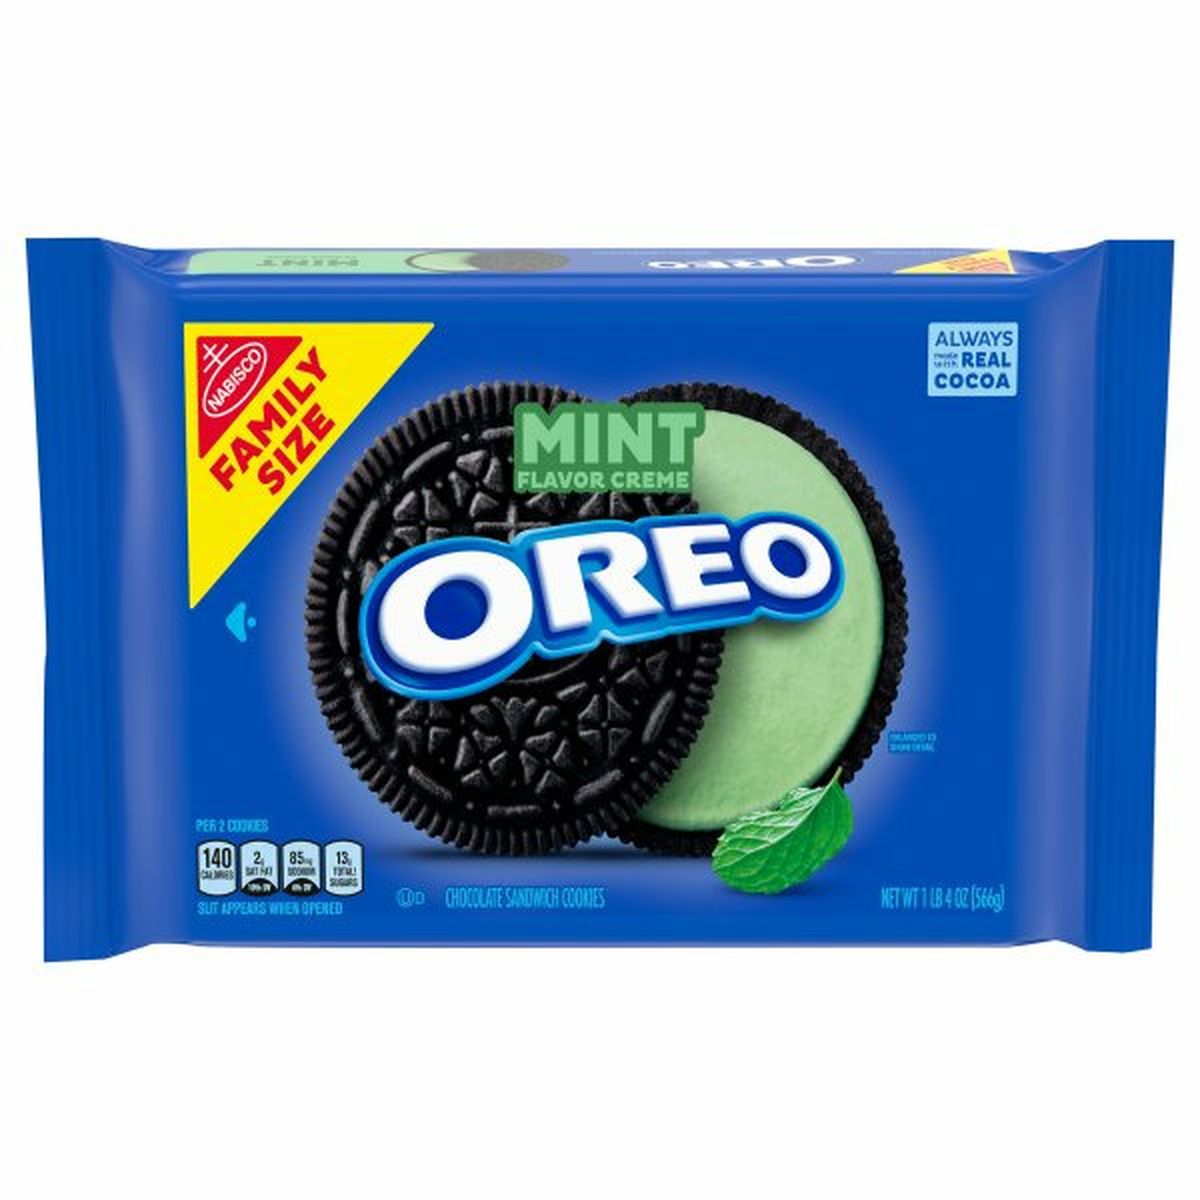 Calories in Oreo Chocolate Sandwich Cookies, Mint Flavor Creme, Family Size